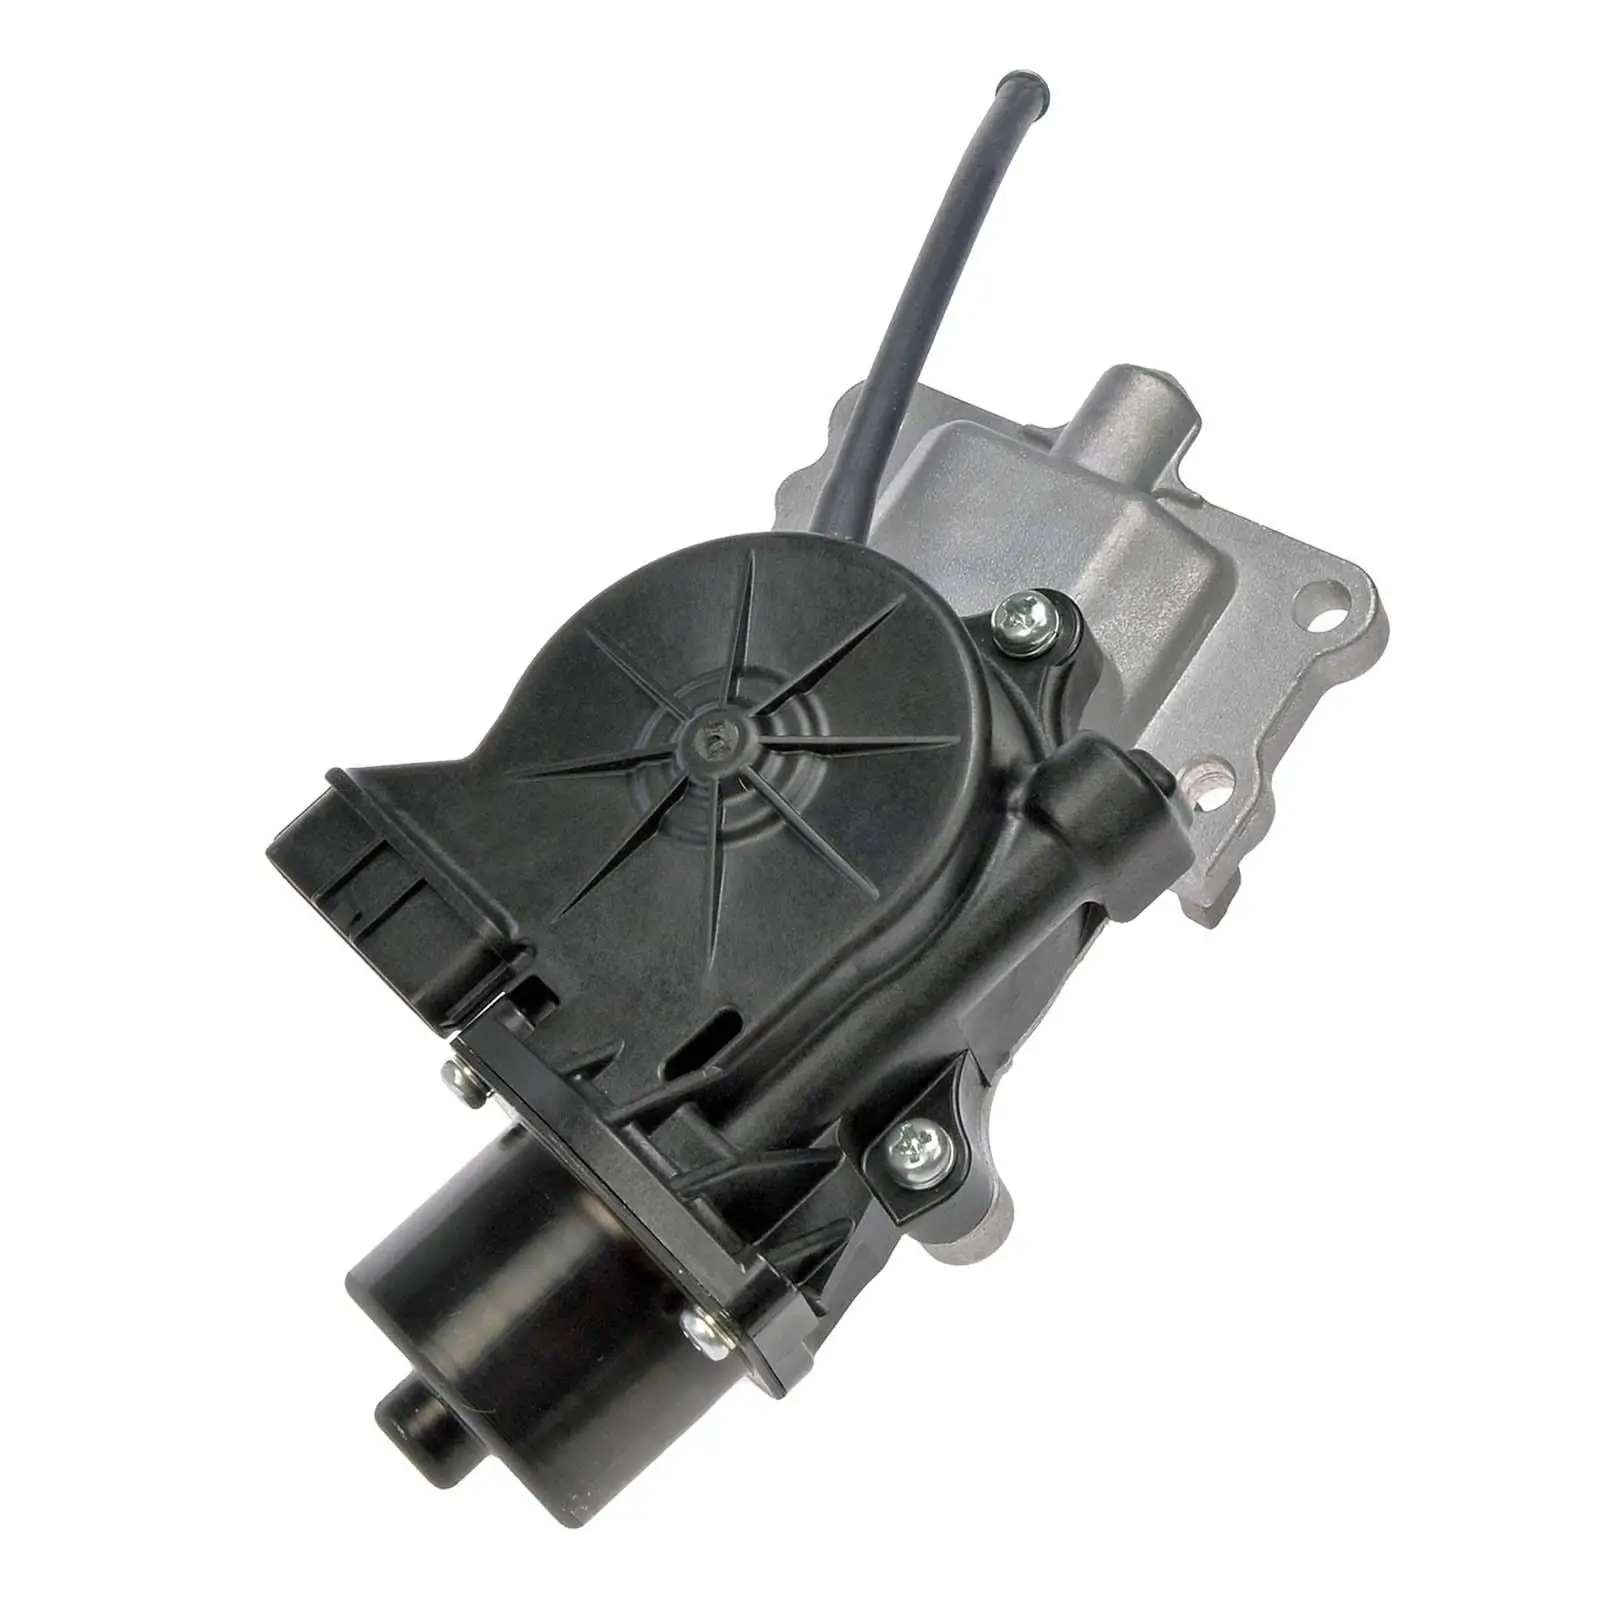 

Front Differential Actuator 600-420 4140034020 for Toyota for sequoia 07-22